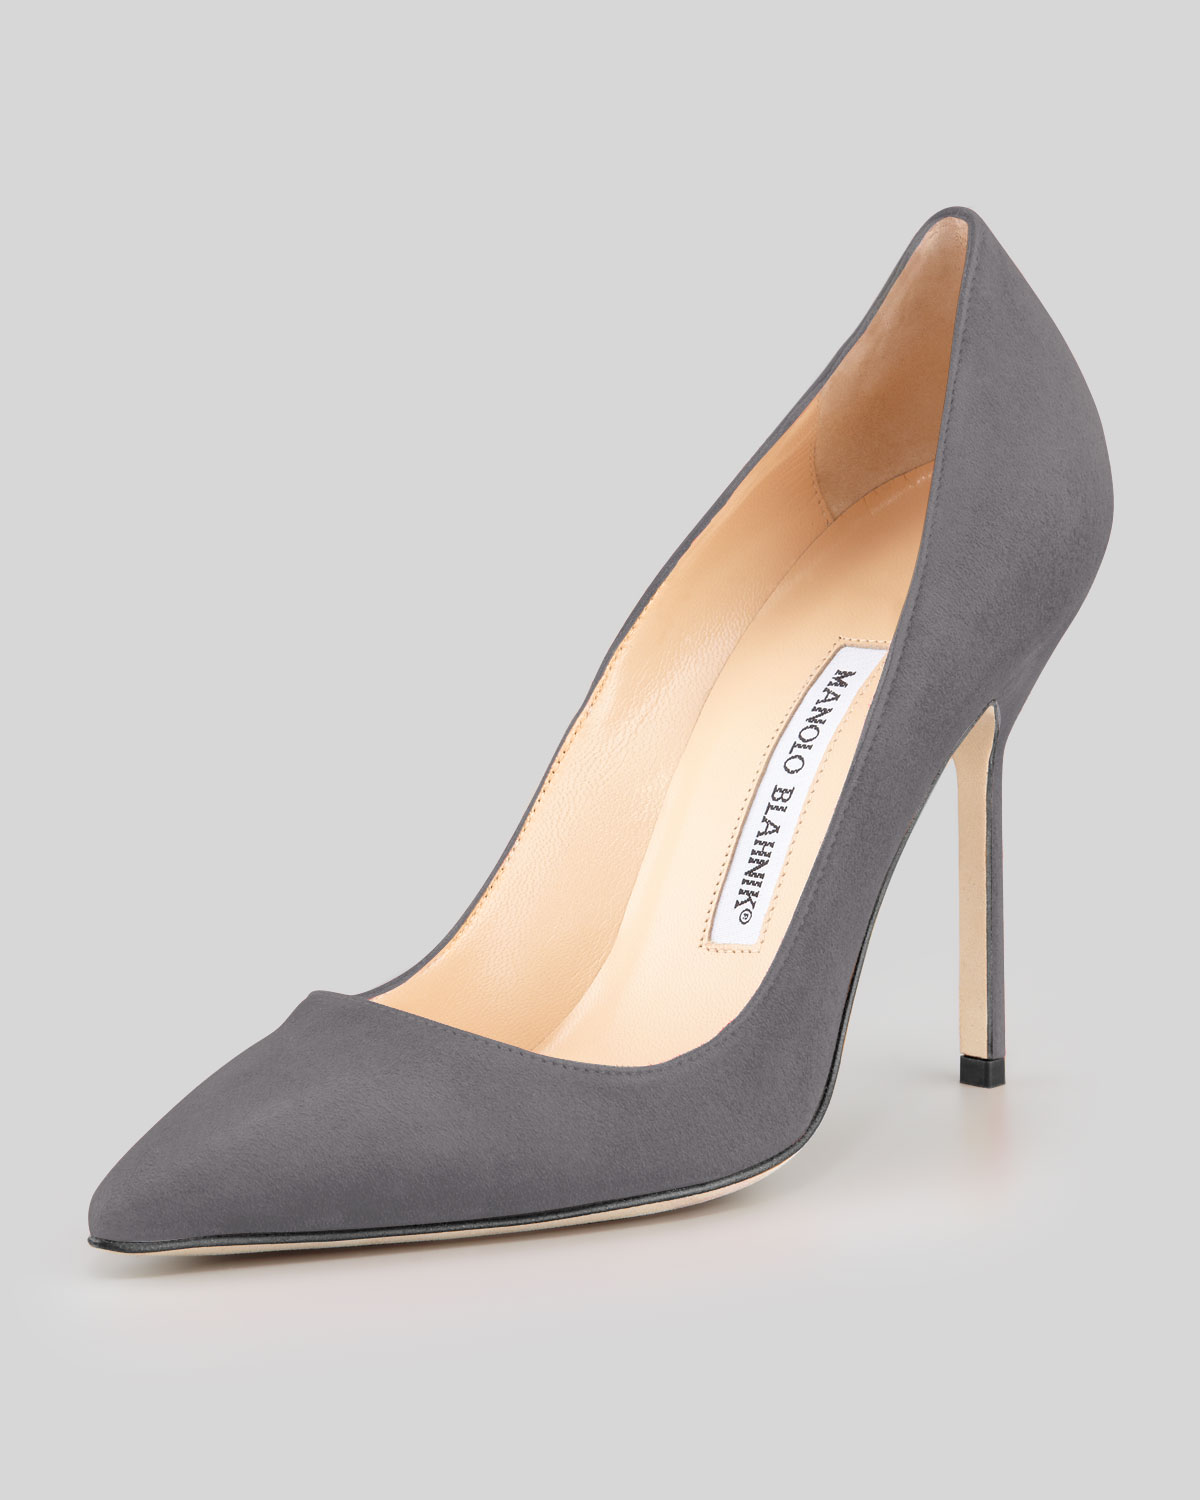 Manolo Blahnik BB Patent 105mm Pump, Nude (Made to Order)